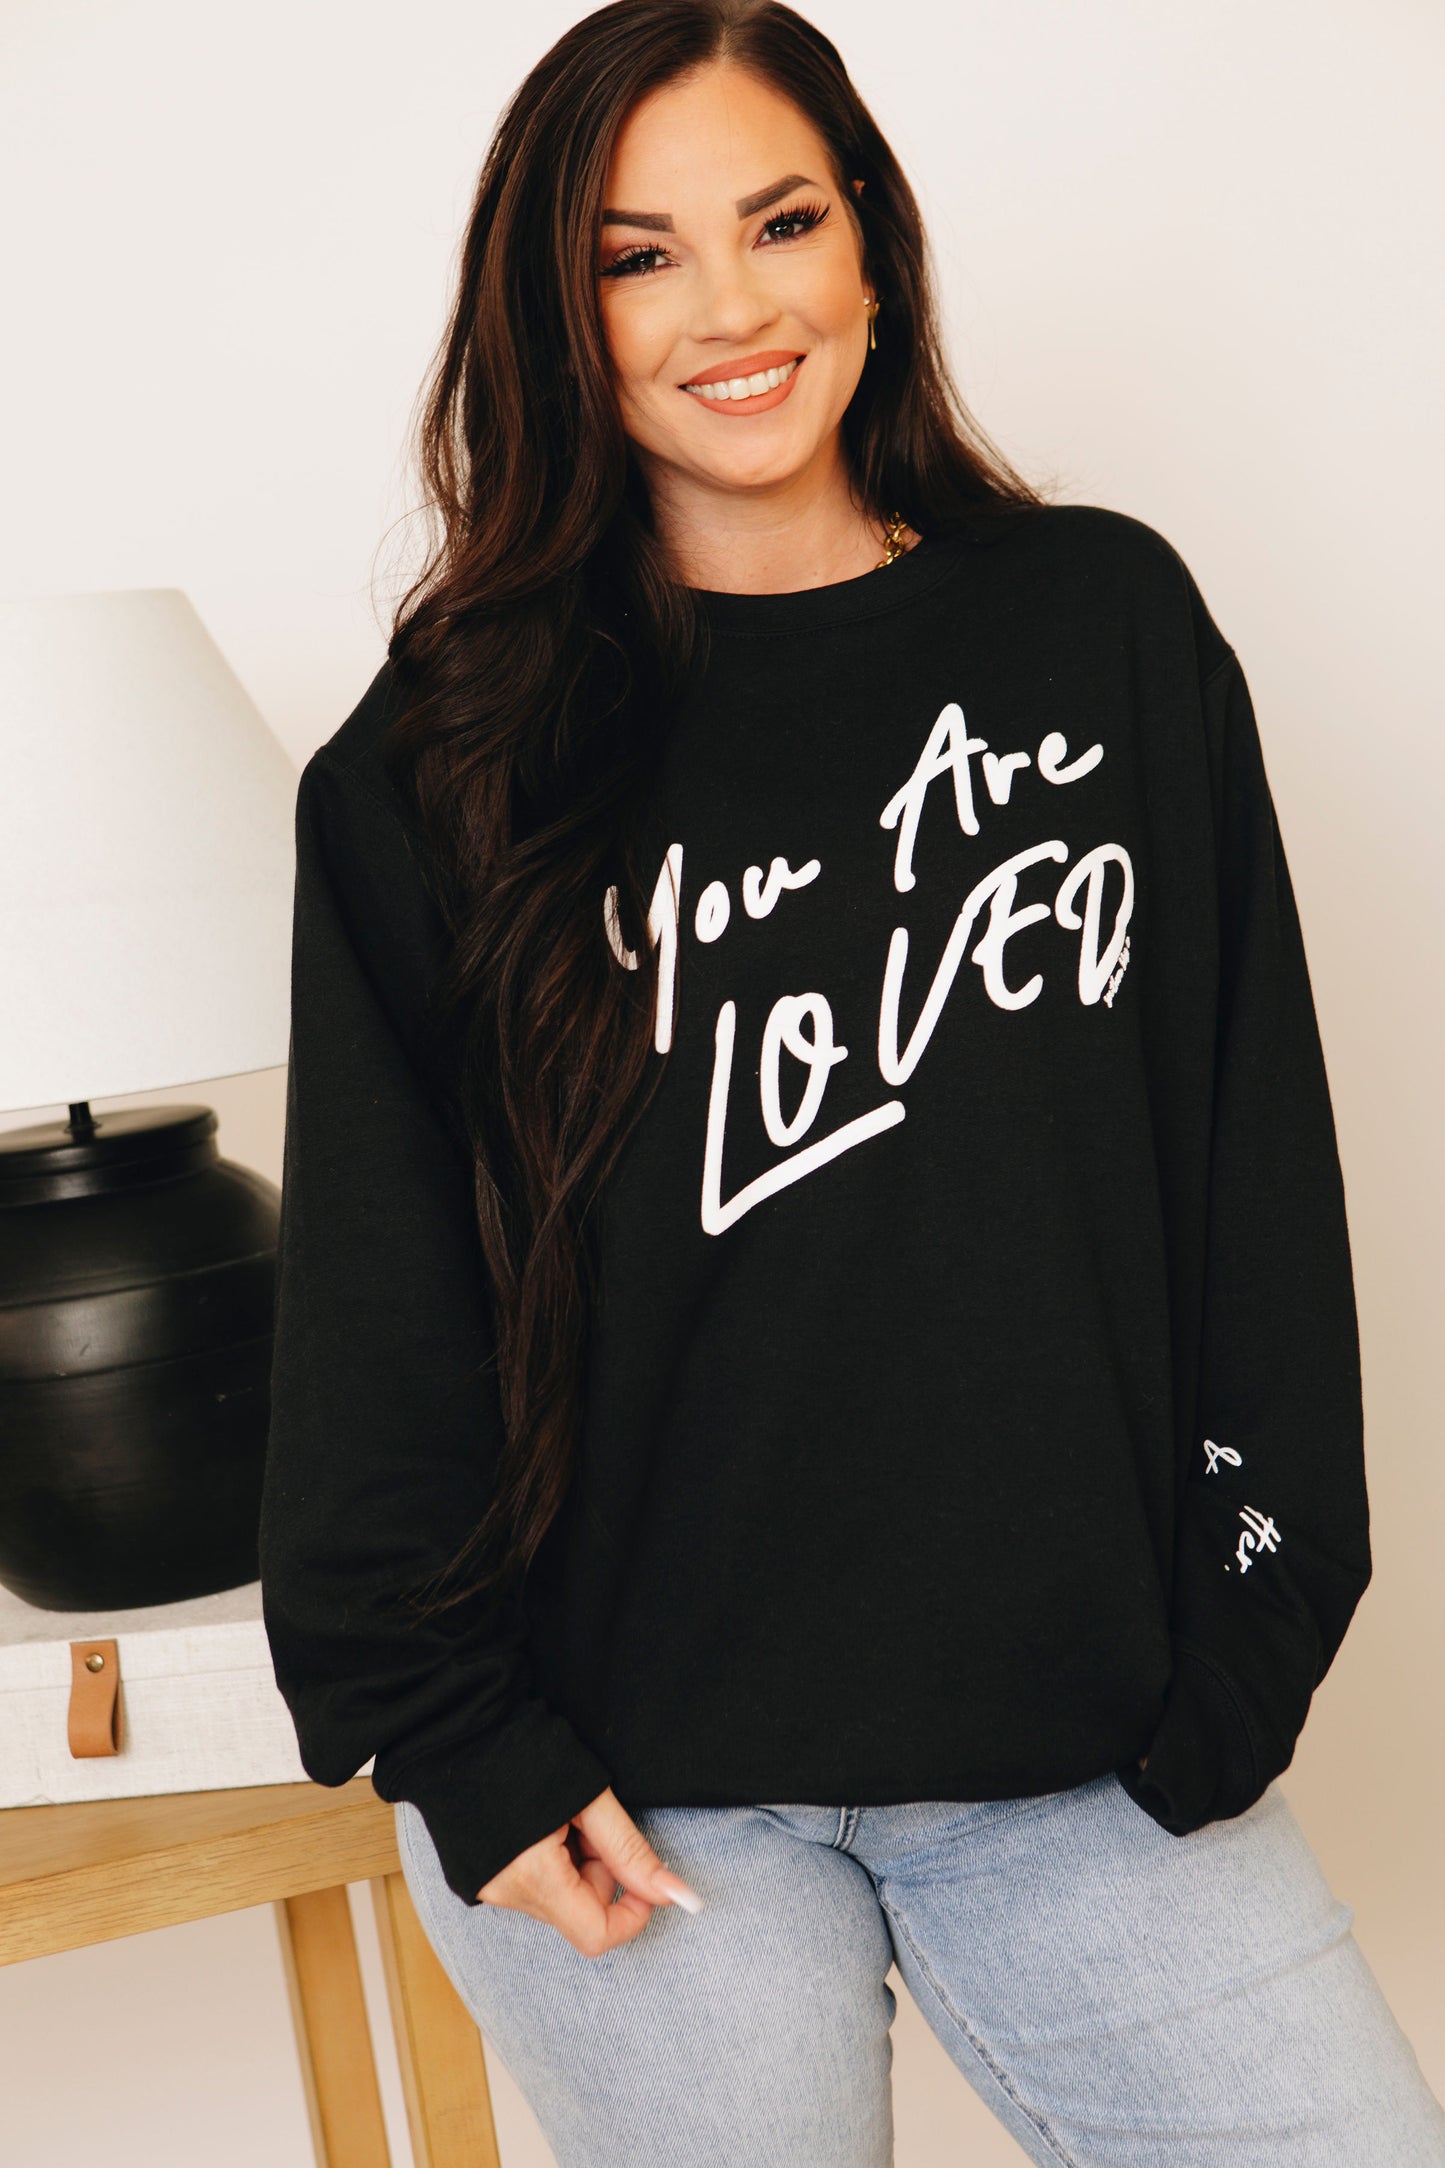 RESTOCKED 2/26 - You Are Loved Puff Paint Sweatshirt (S-3XL)